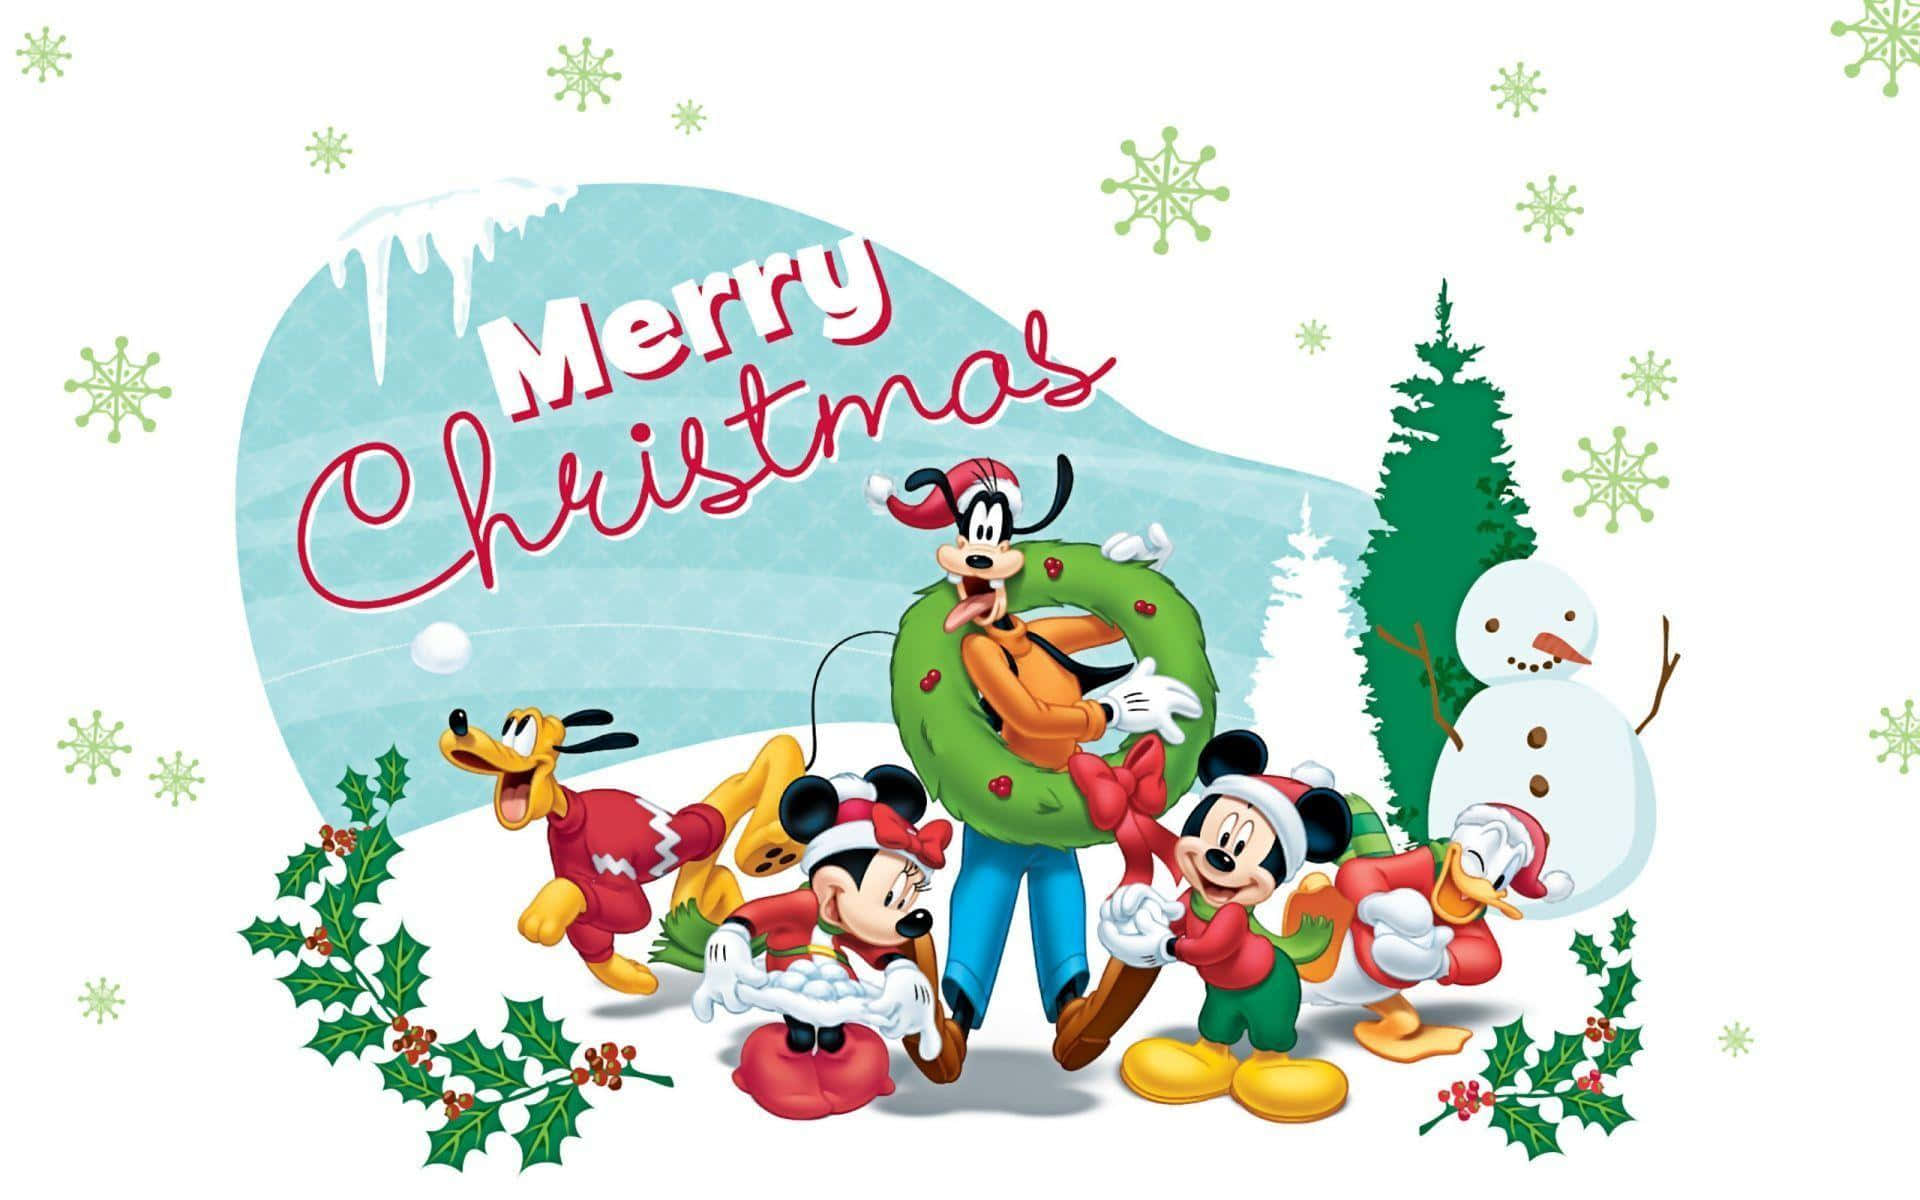 Celebrate Christmas with the Magic of Disney